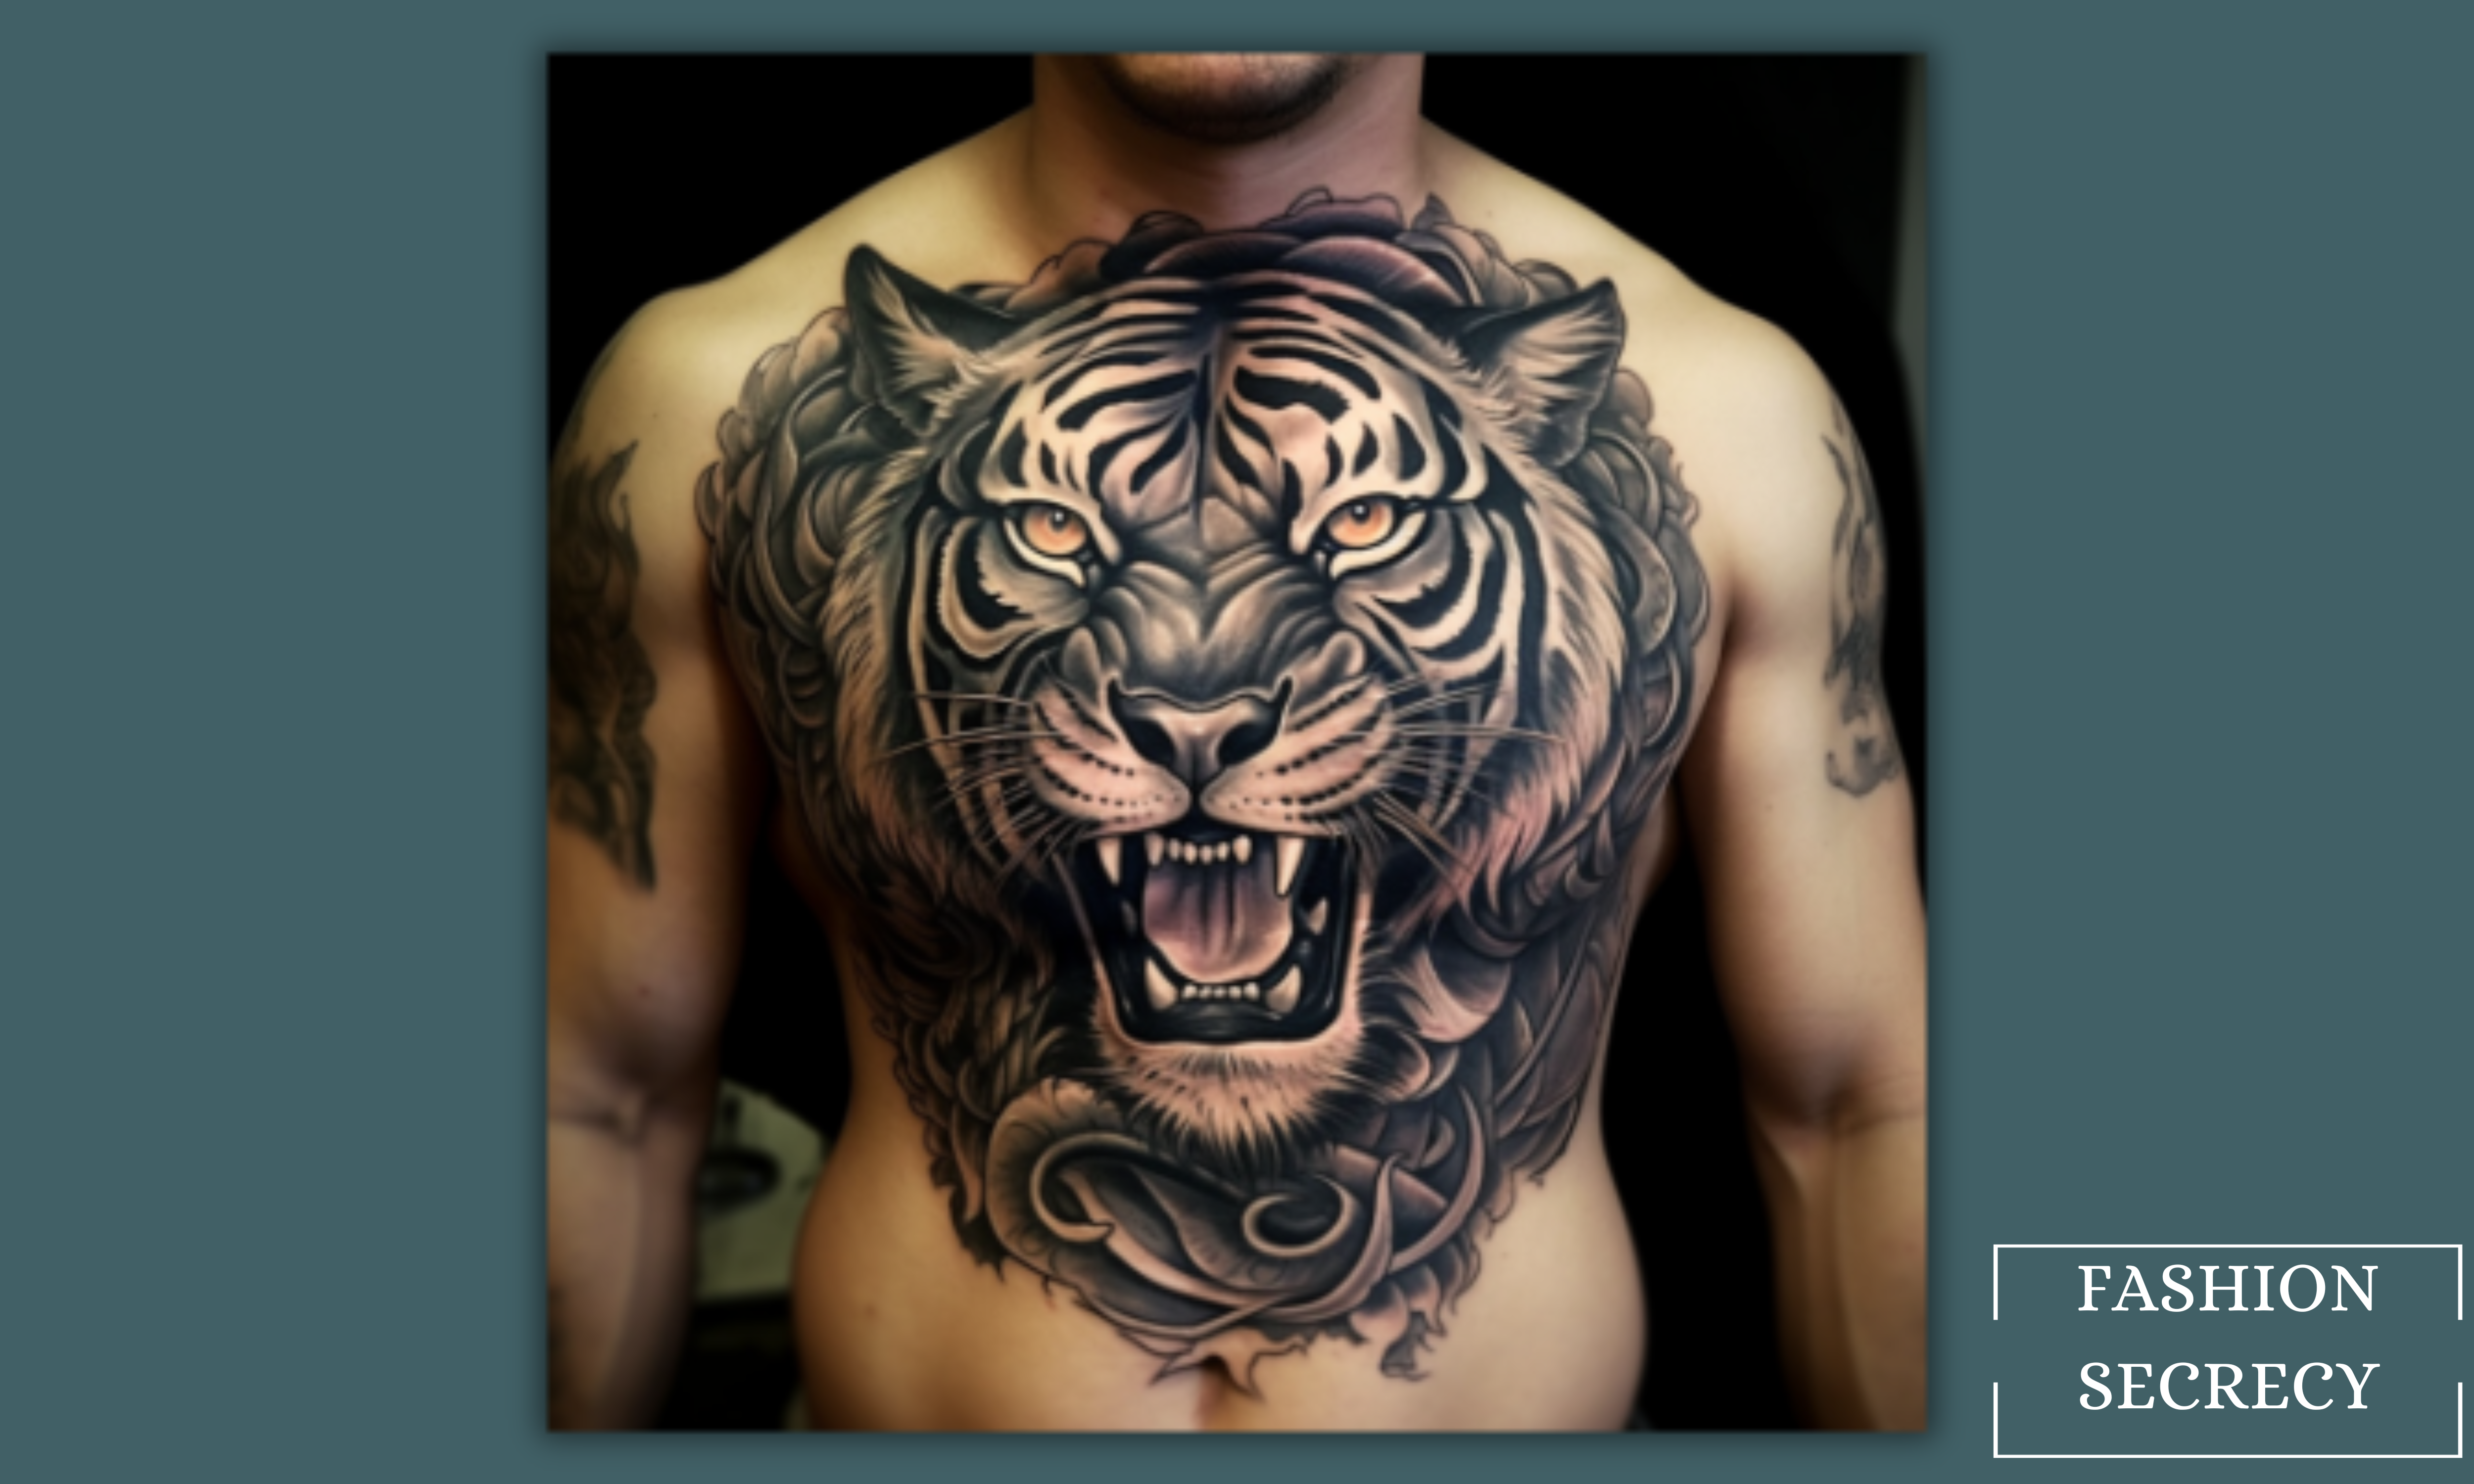 20 Trendy Tattoo Designs For Men To Get Inked In 2019 | Tattoo designs men, Tattoo  fashion men, Stylish tattoo